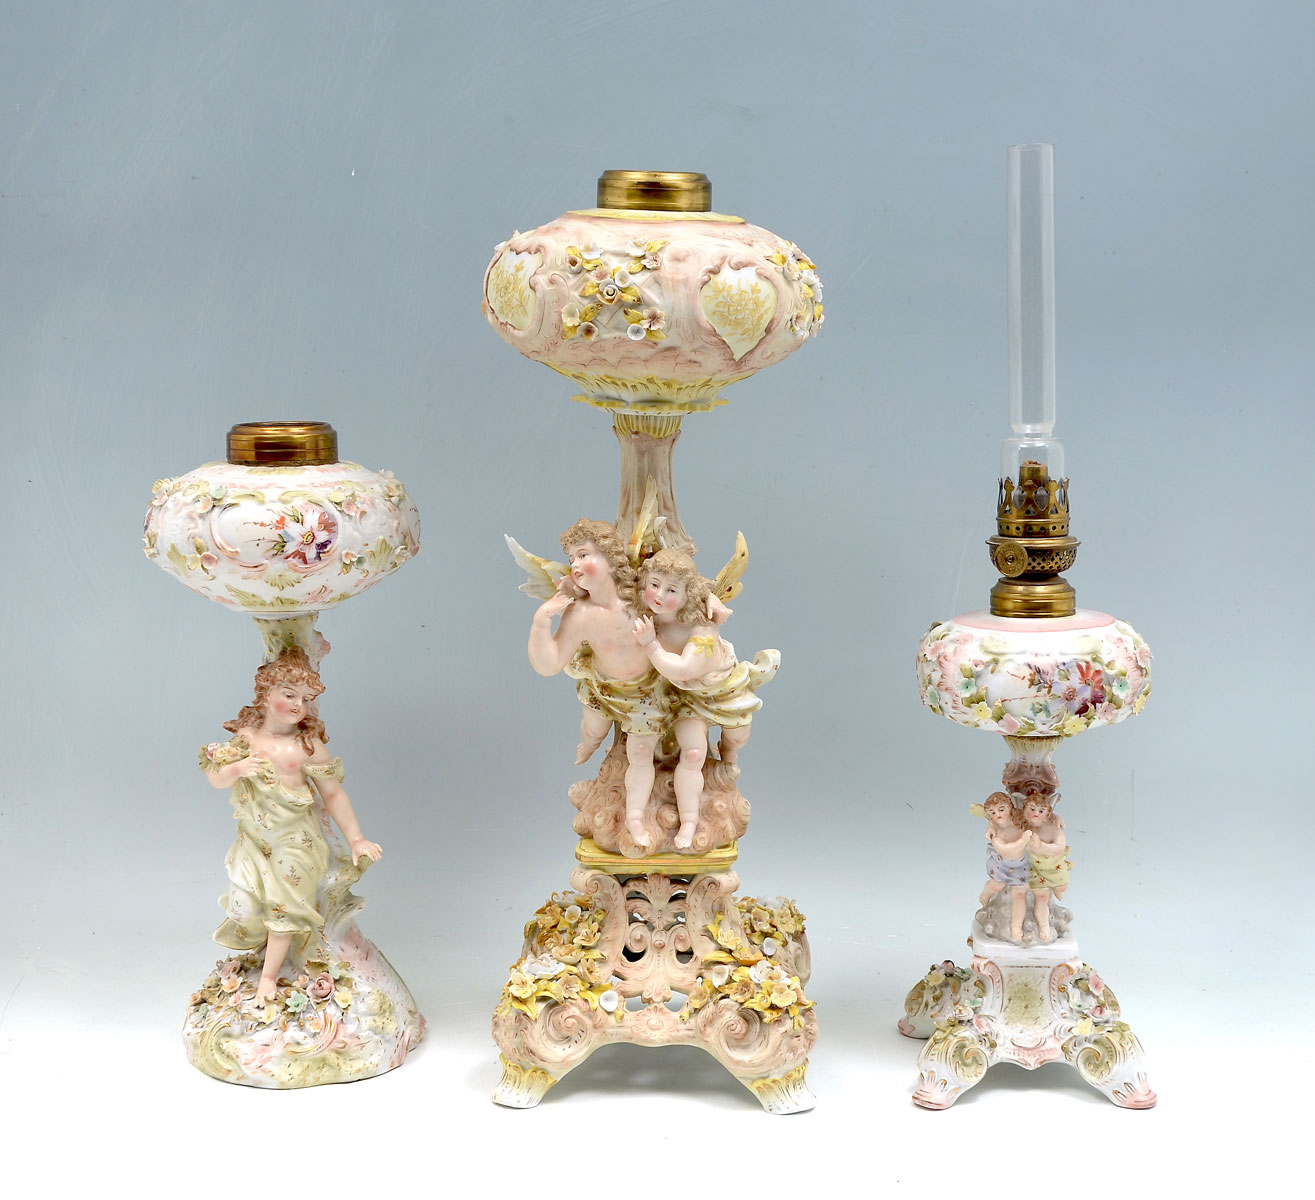 3 DRESDEN STYLE FIGURAL OIL LAMPS: